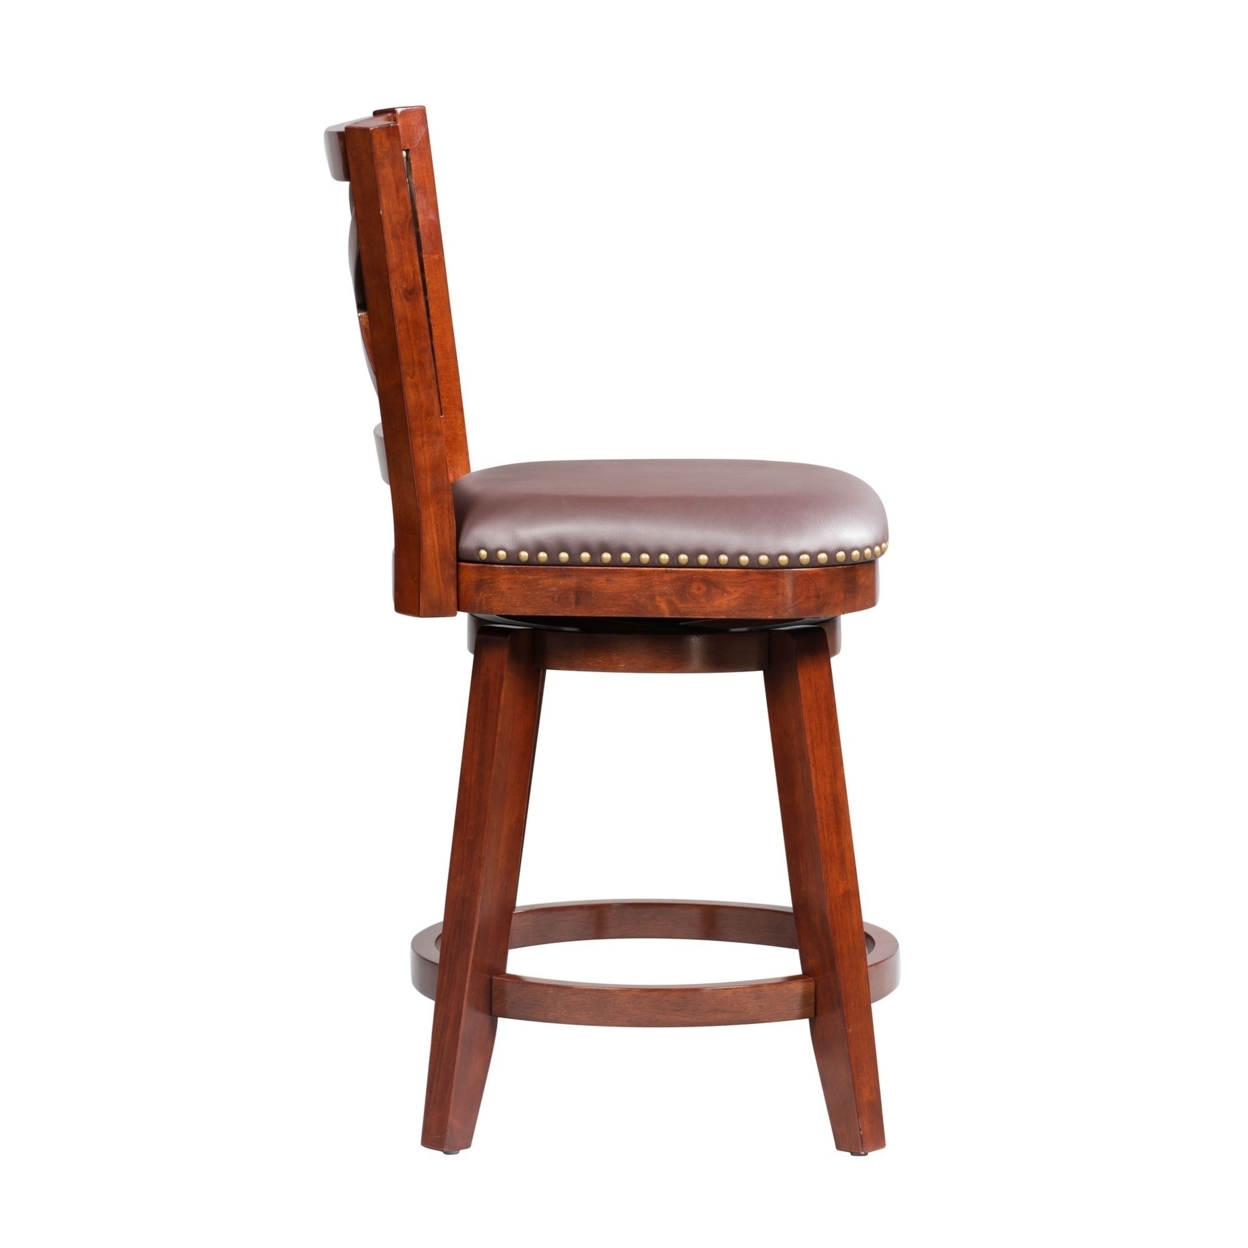 Swivel Counter Stool With Curved Padded Back And Nailhead Trim, Cherry Brown- Saltoro Sherpi